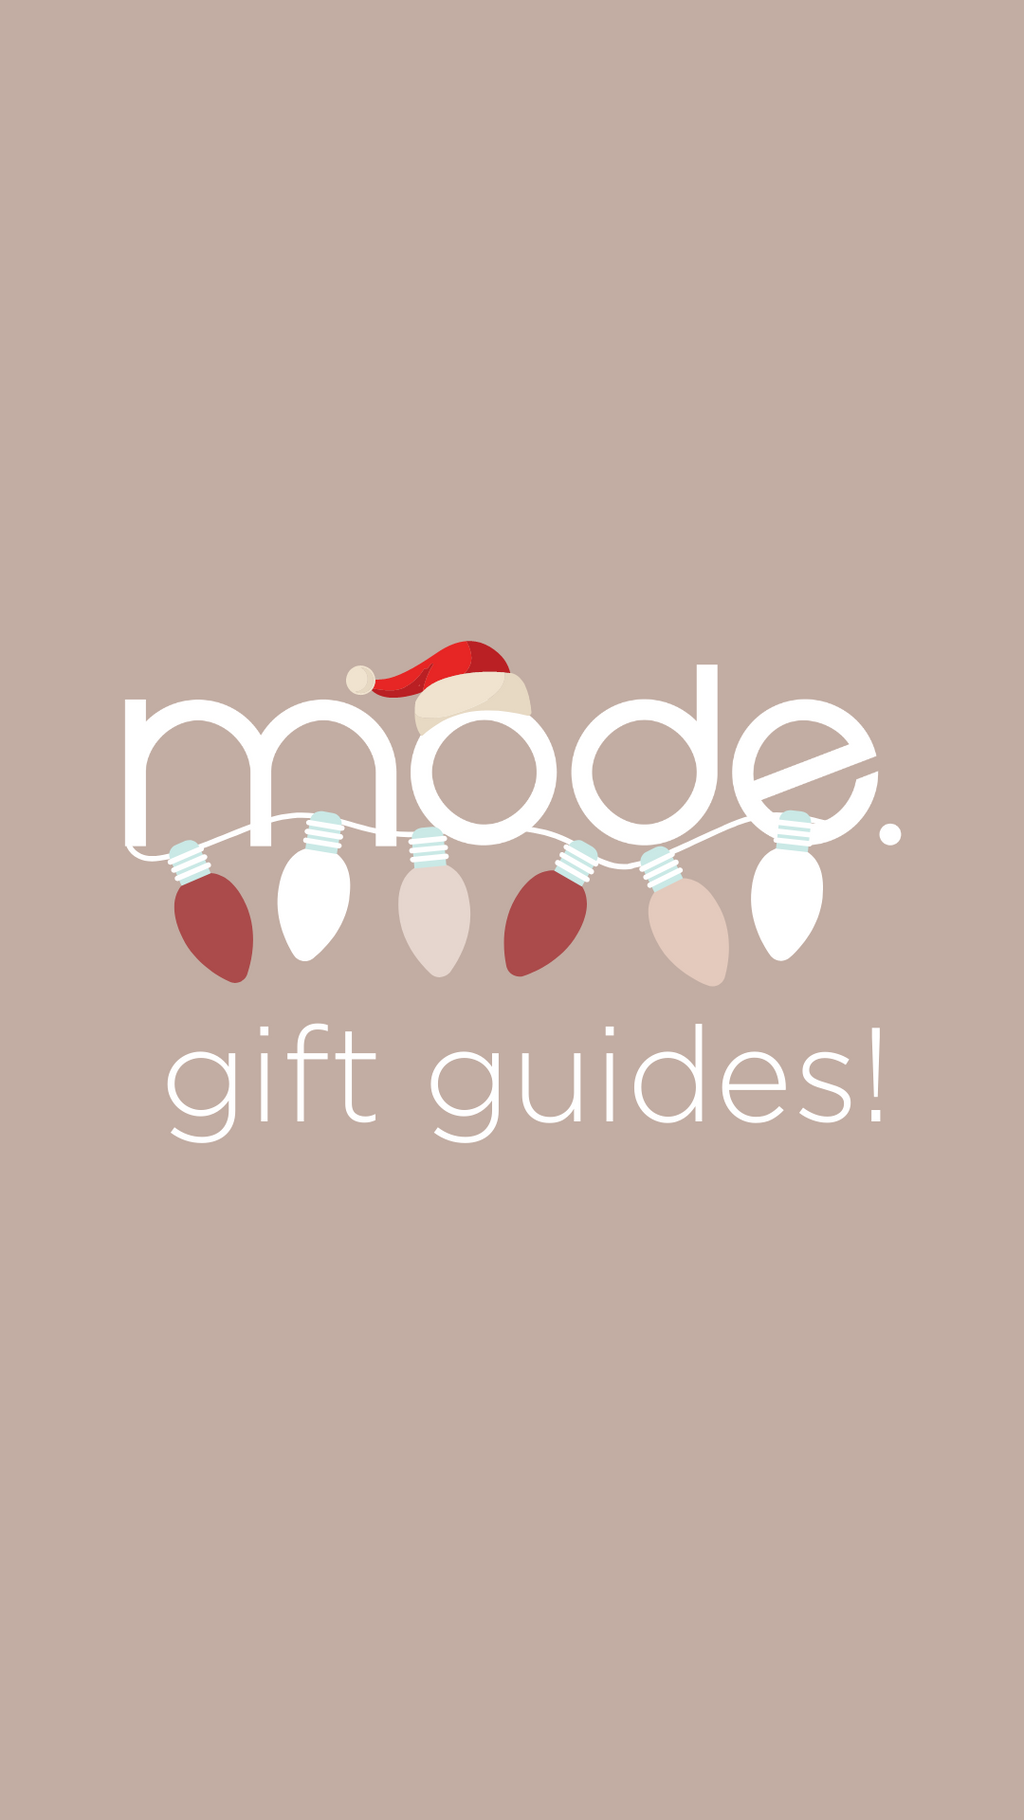 mode gift guides 2020!